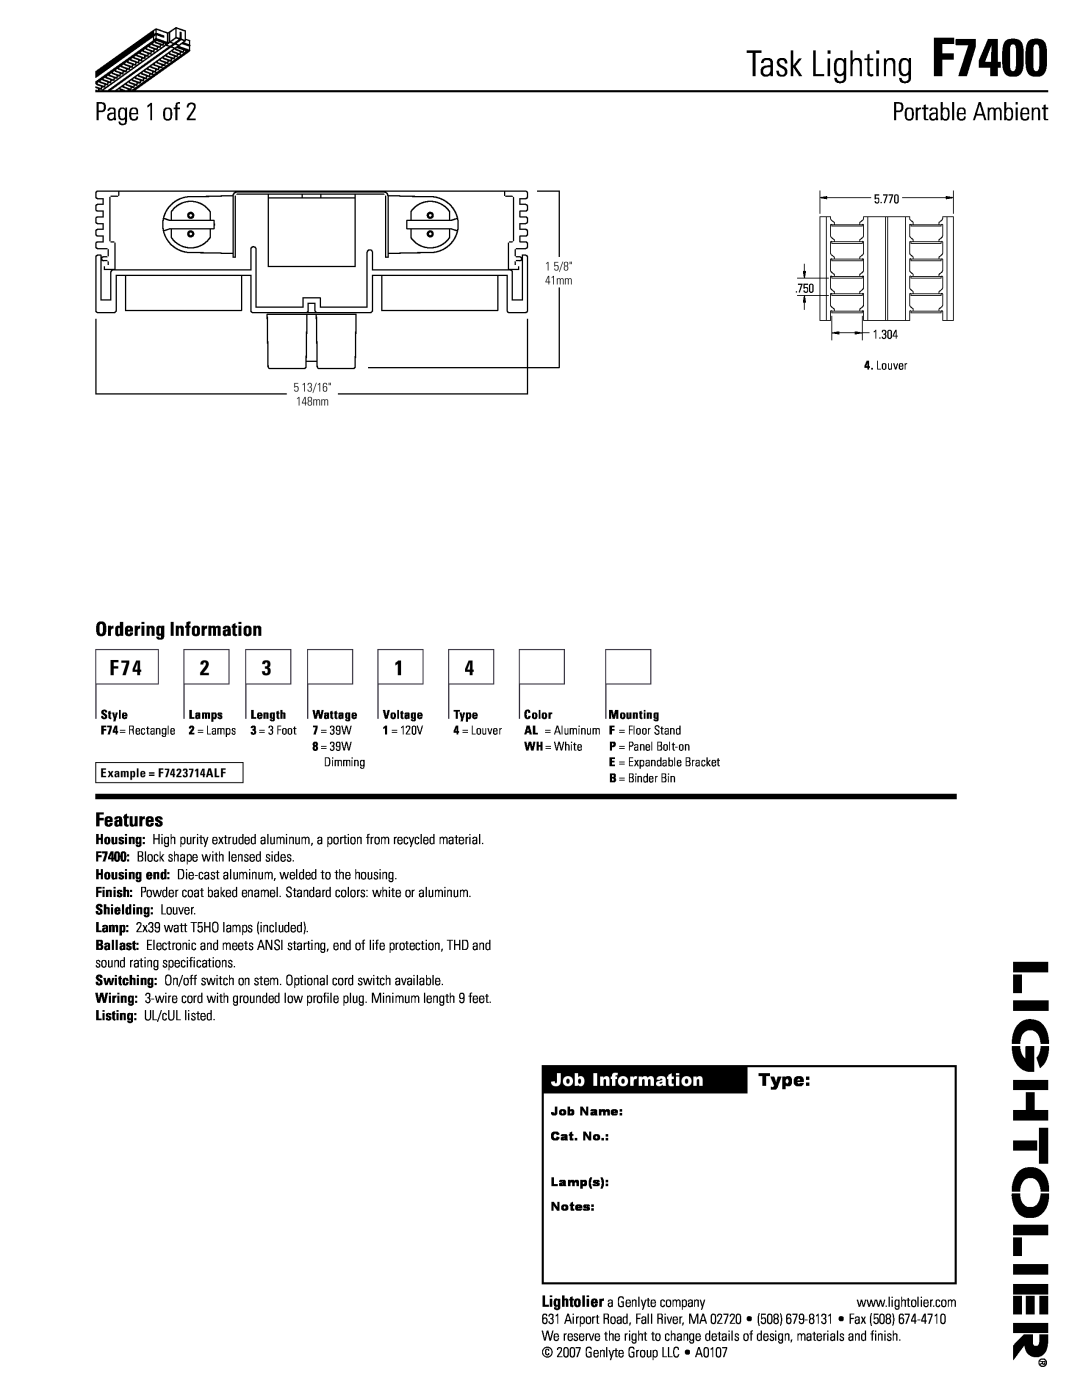 Lightolier specifications Page of, Portable Ambient, Job Information, Type, Task Lighting F7400, Ordering Information 